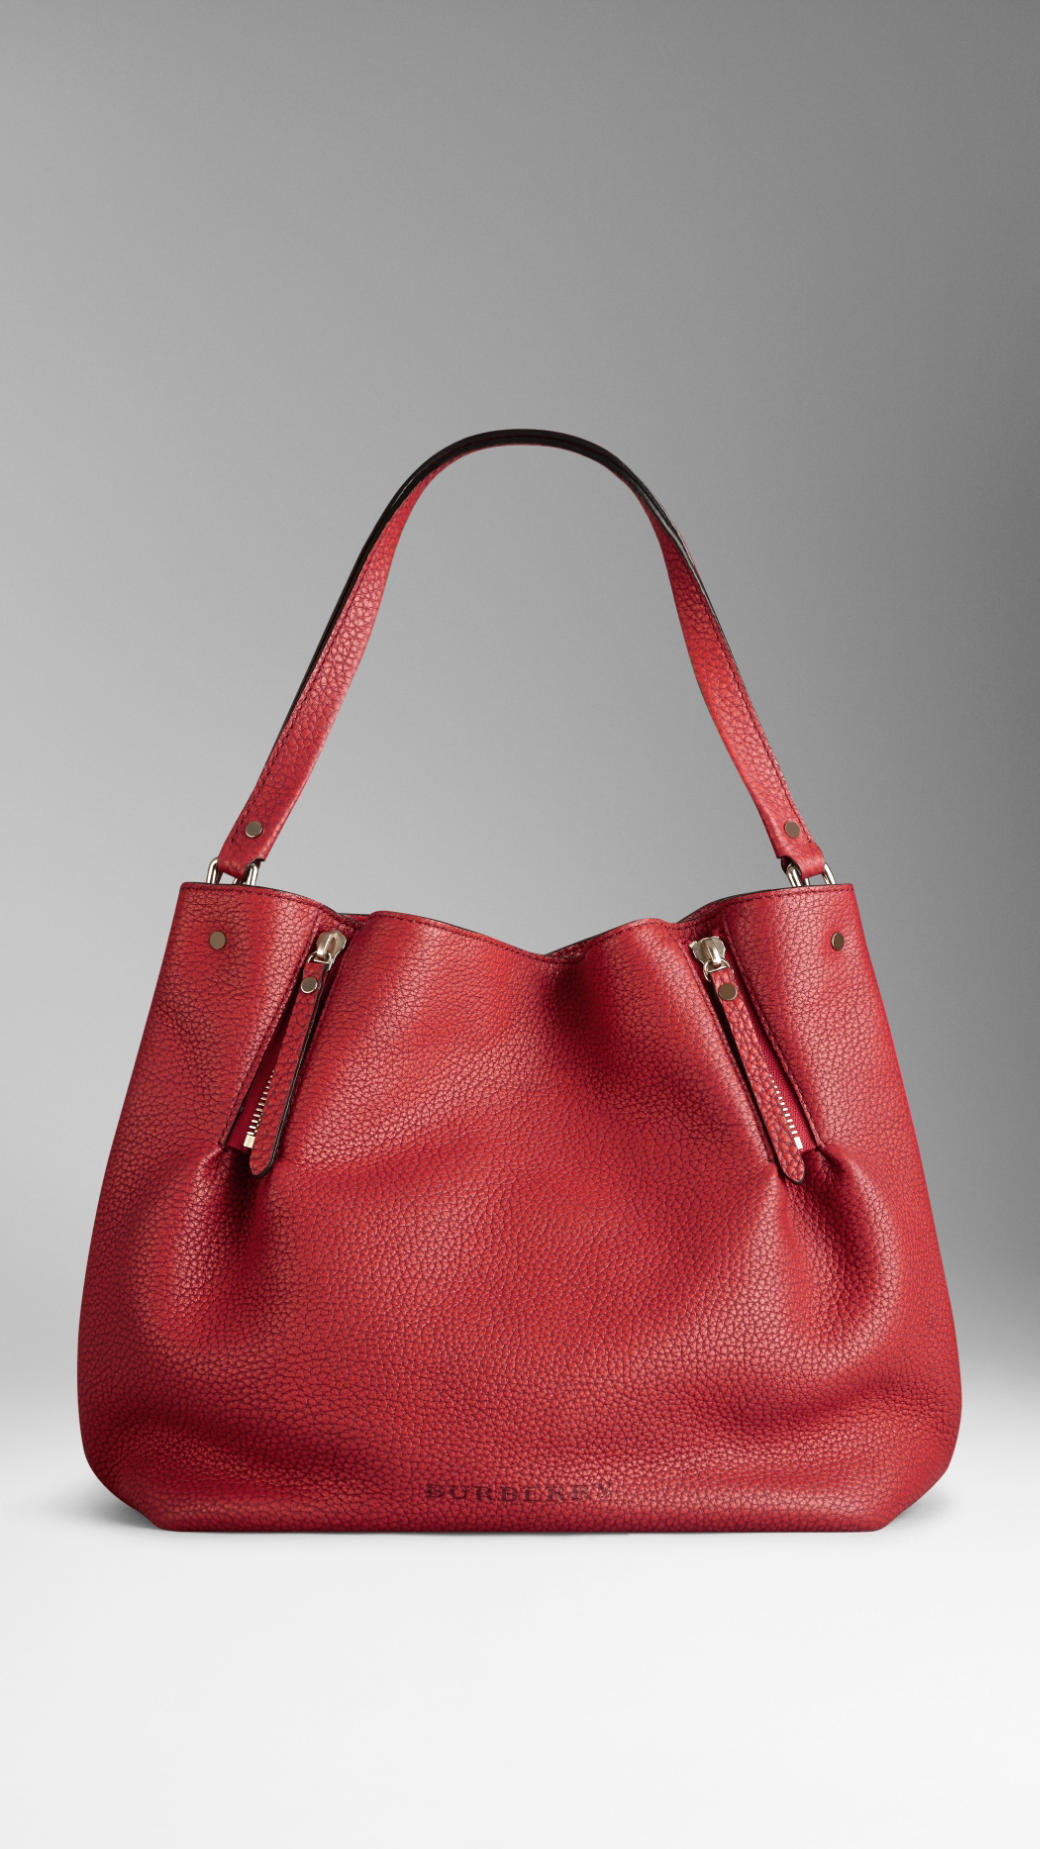 Burberry Medium Zip Detail Leather Tote Bag in Military Red (Red) - Lyst